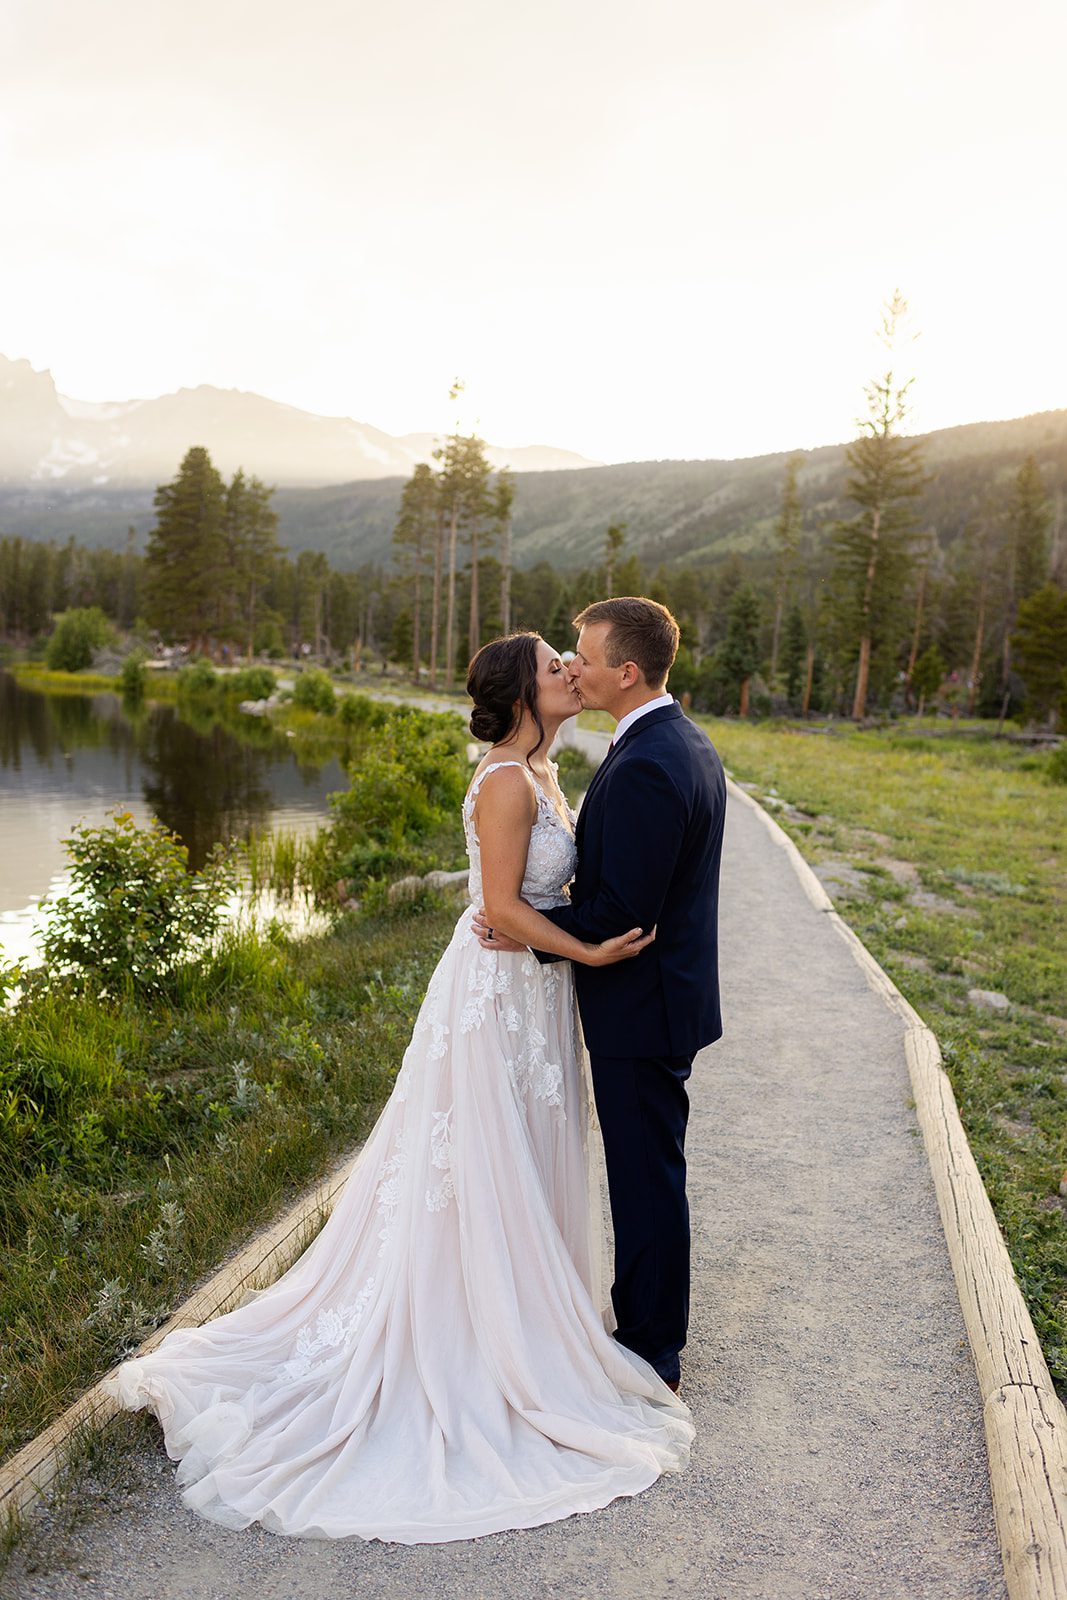 Bride and groom kiss next to Sprague Lake at sunset for their elopement